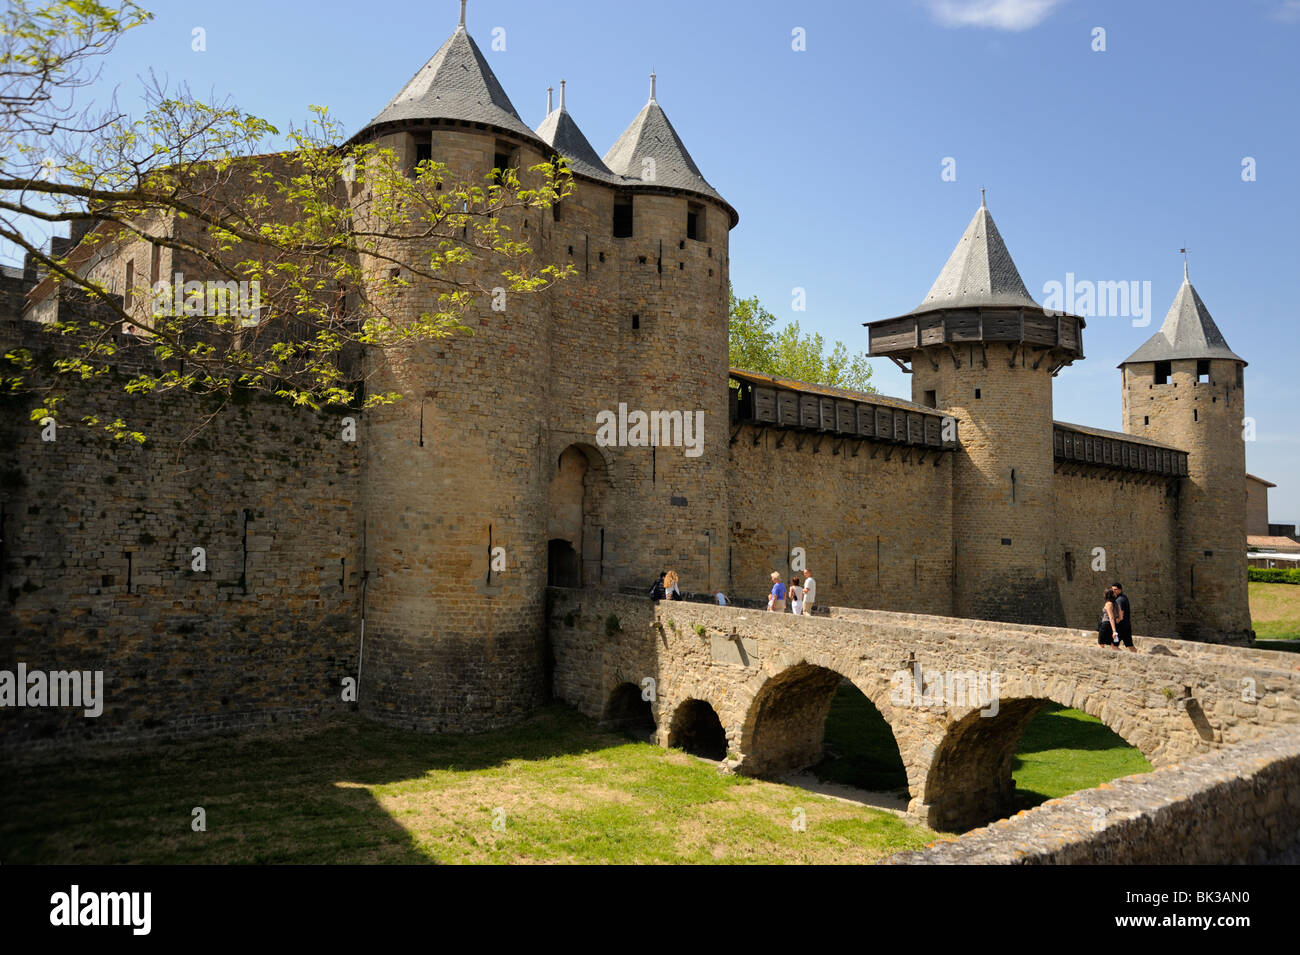 Chateau Comtal in the walled and turreted fortress of La Cite, Carcassonne, UNESCO World Heritage Site, Languedoc, France Stock Photo